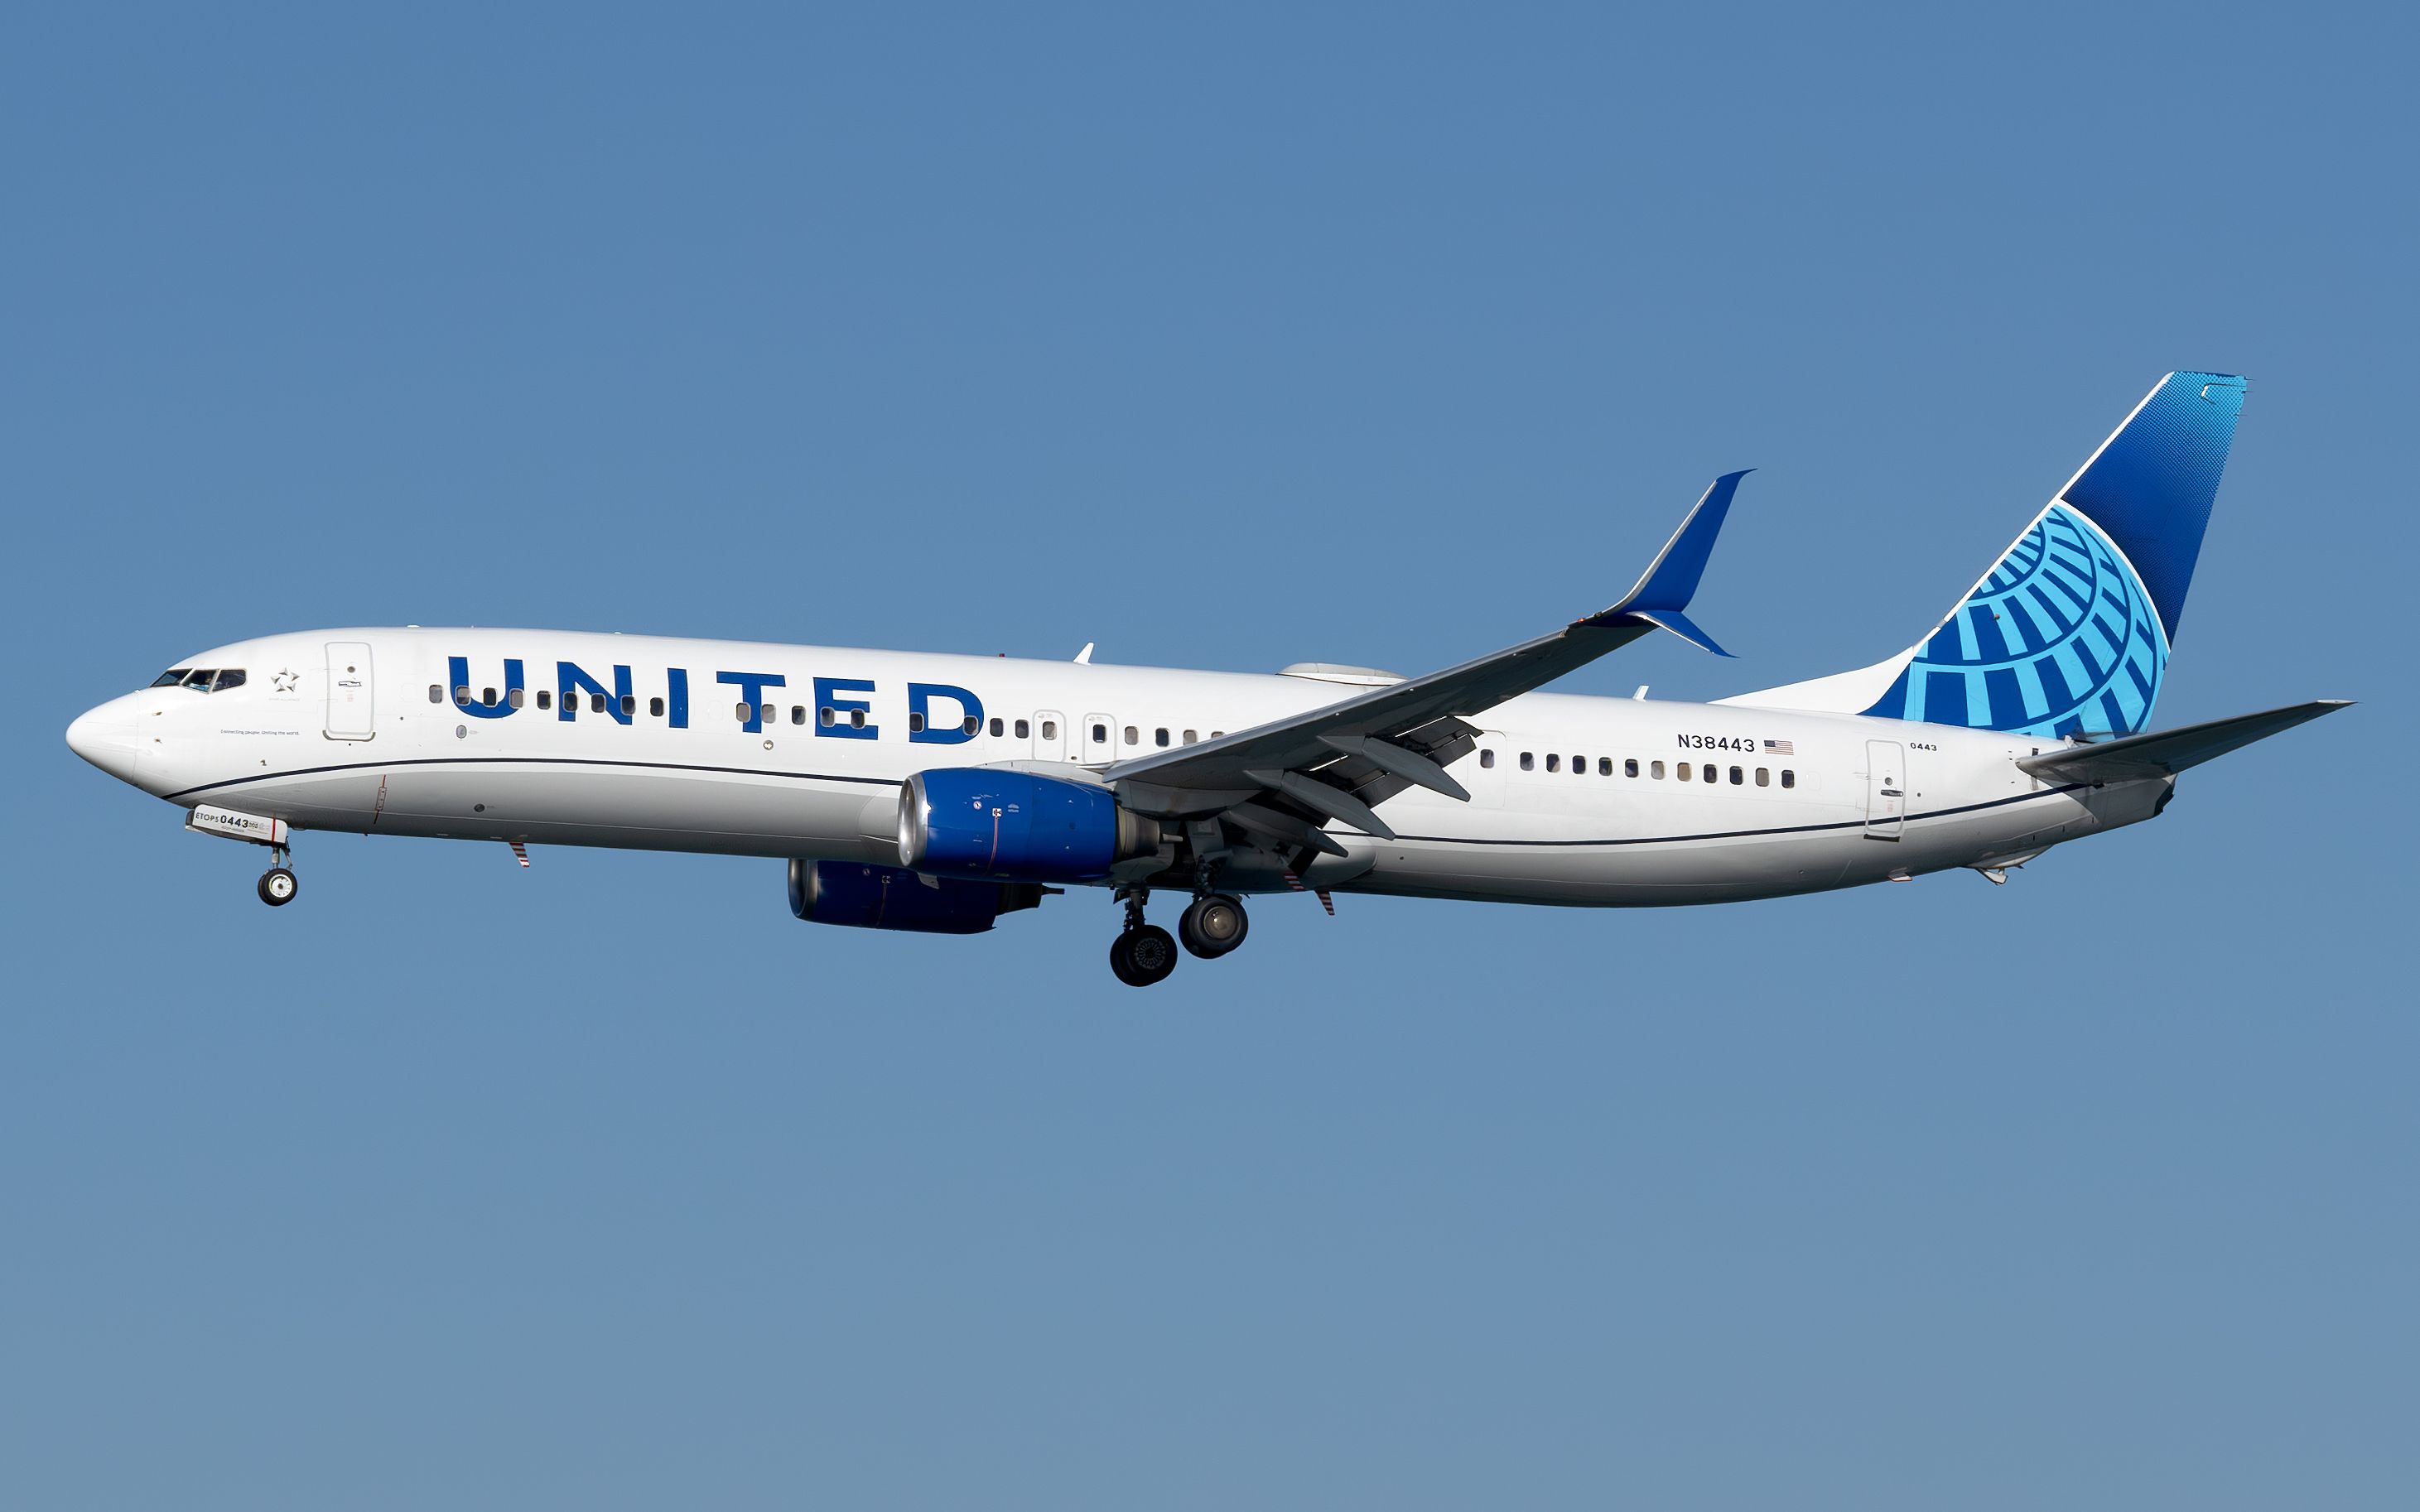 A United Airlines Boeing 737-900 flying in the sky.